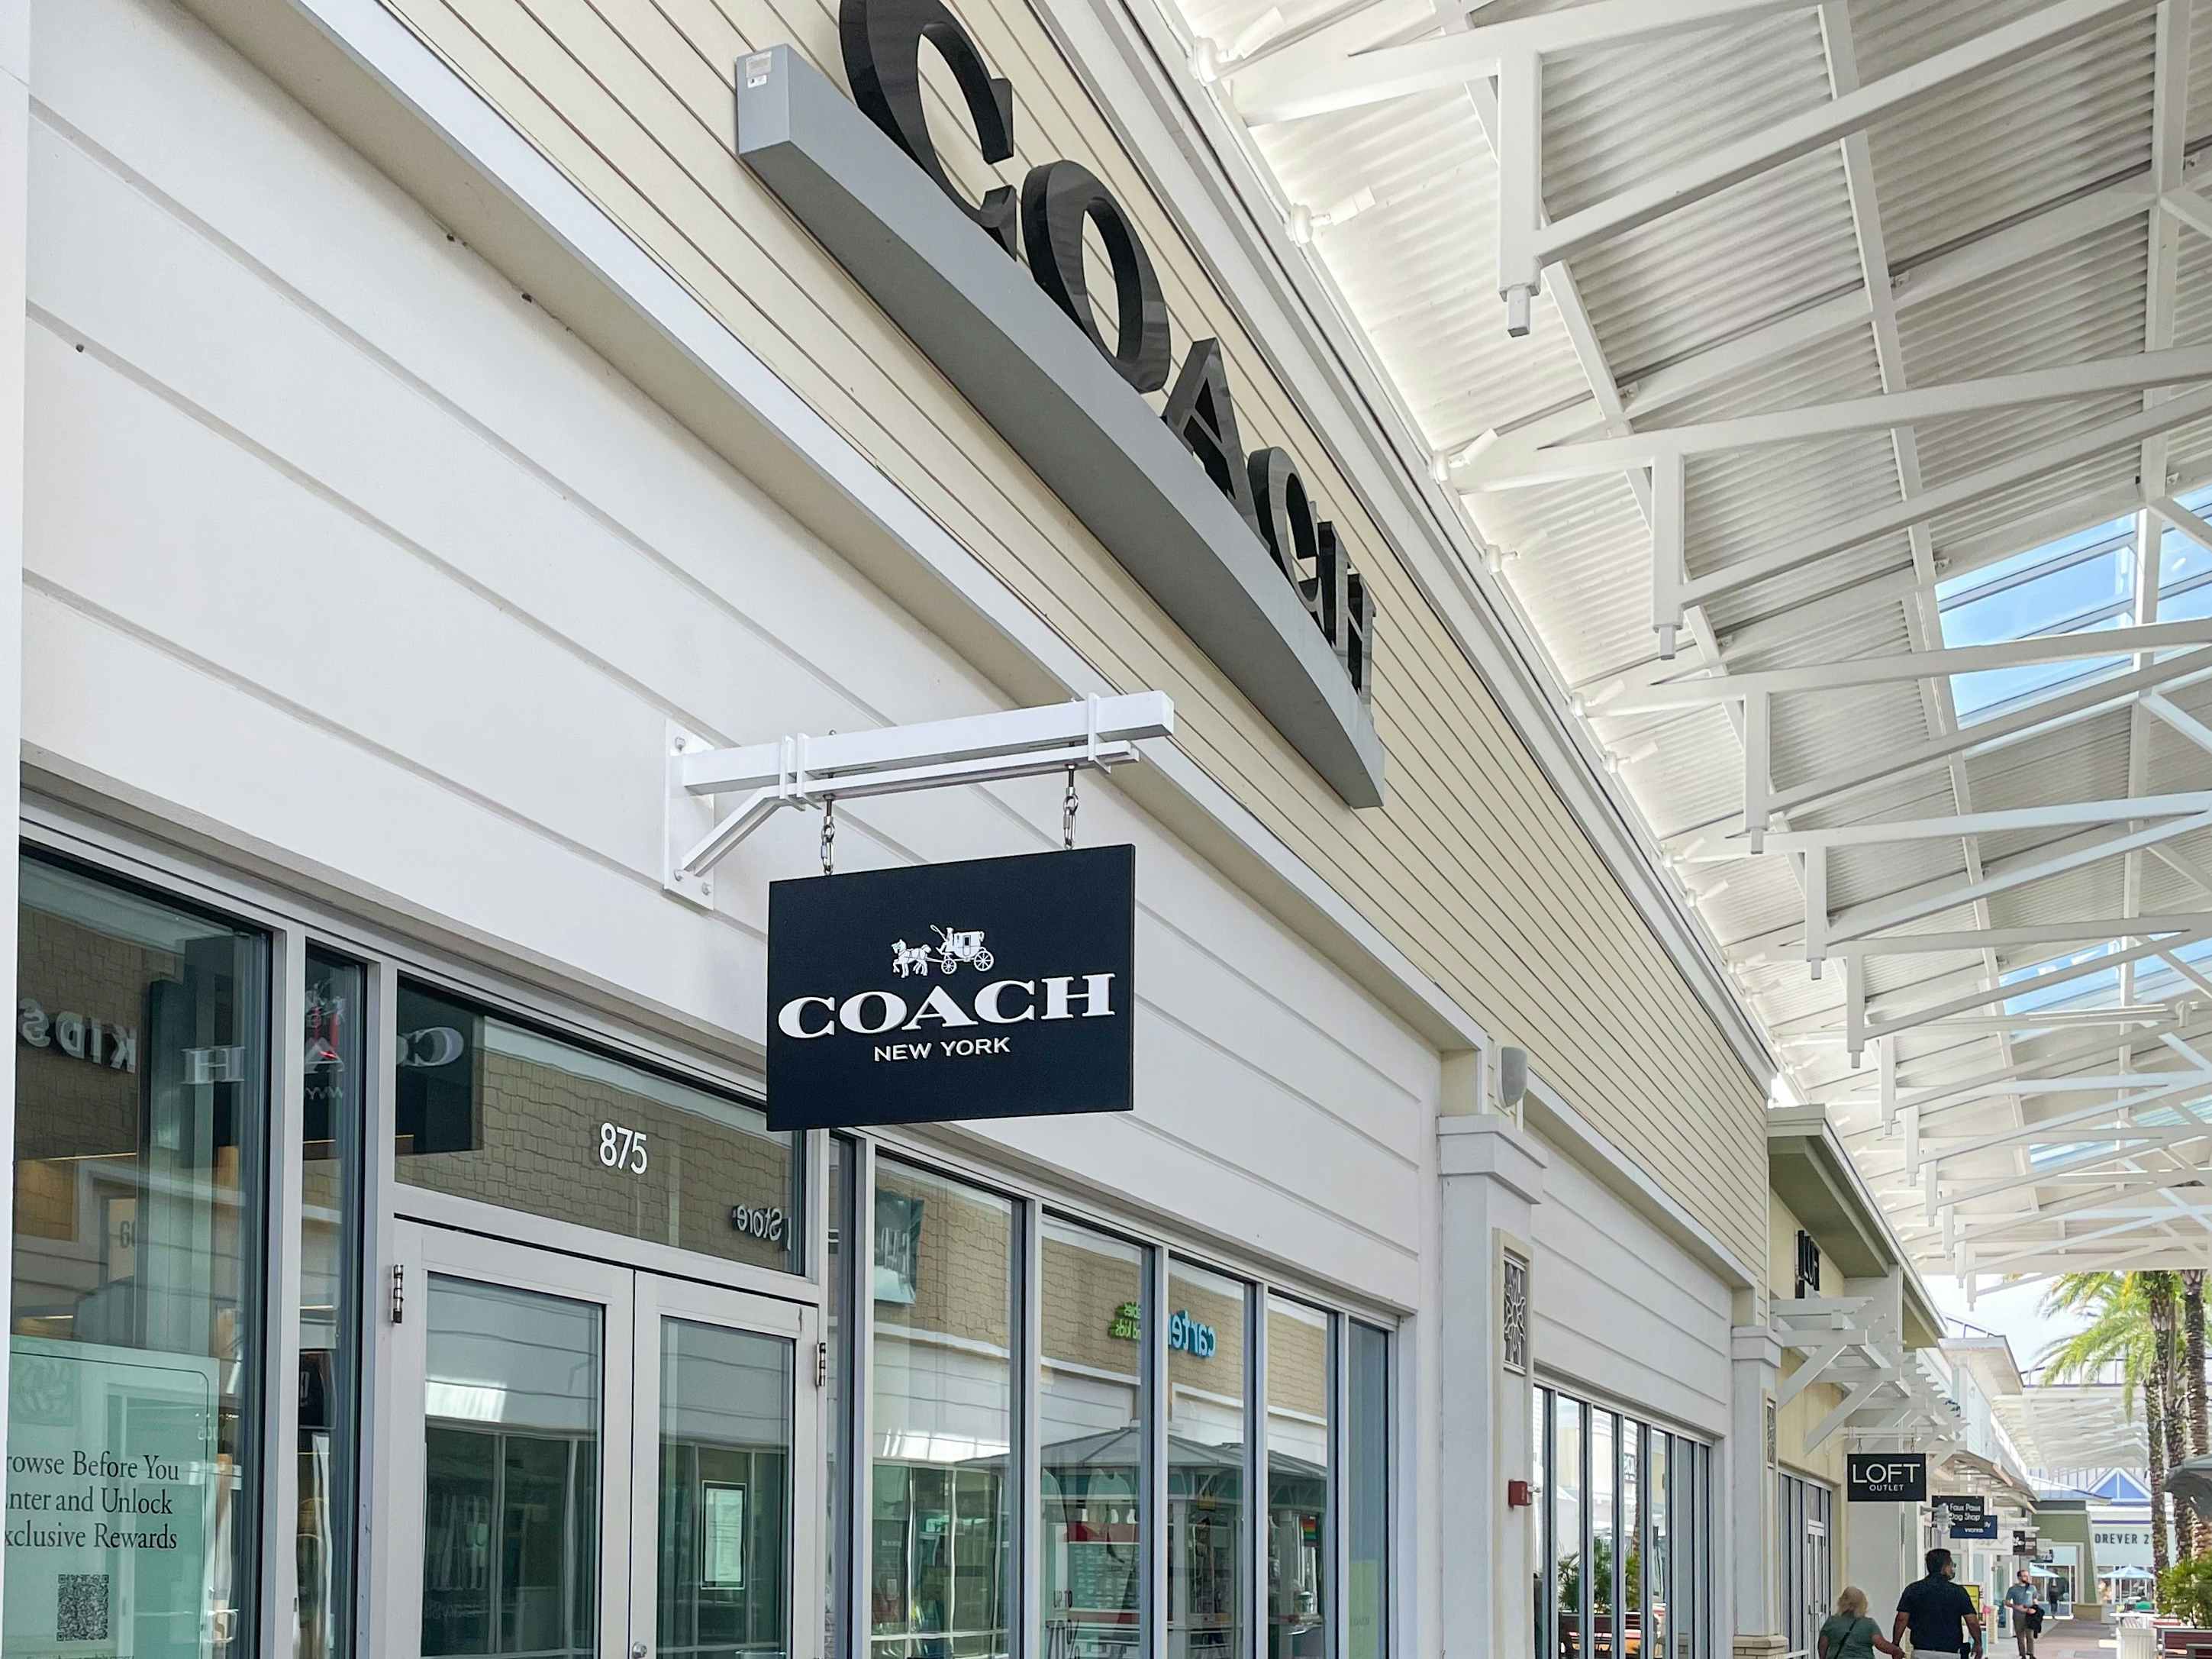 What online Coach outlets sell authentic Coach bags for discounted